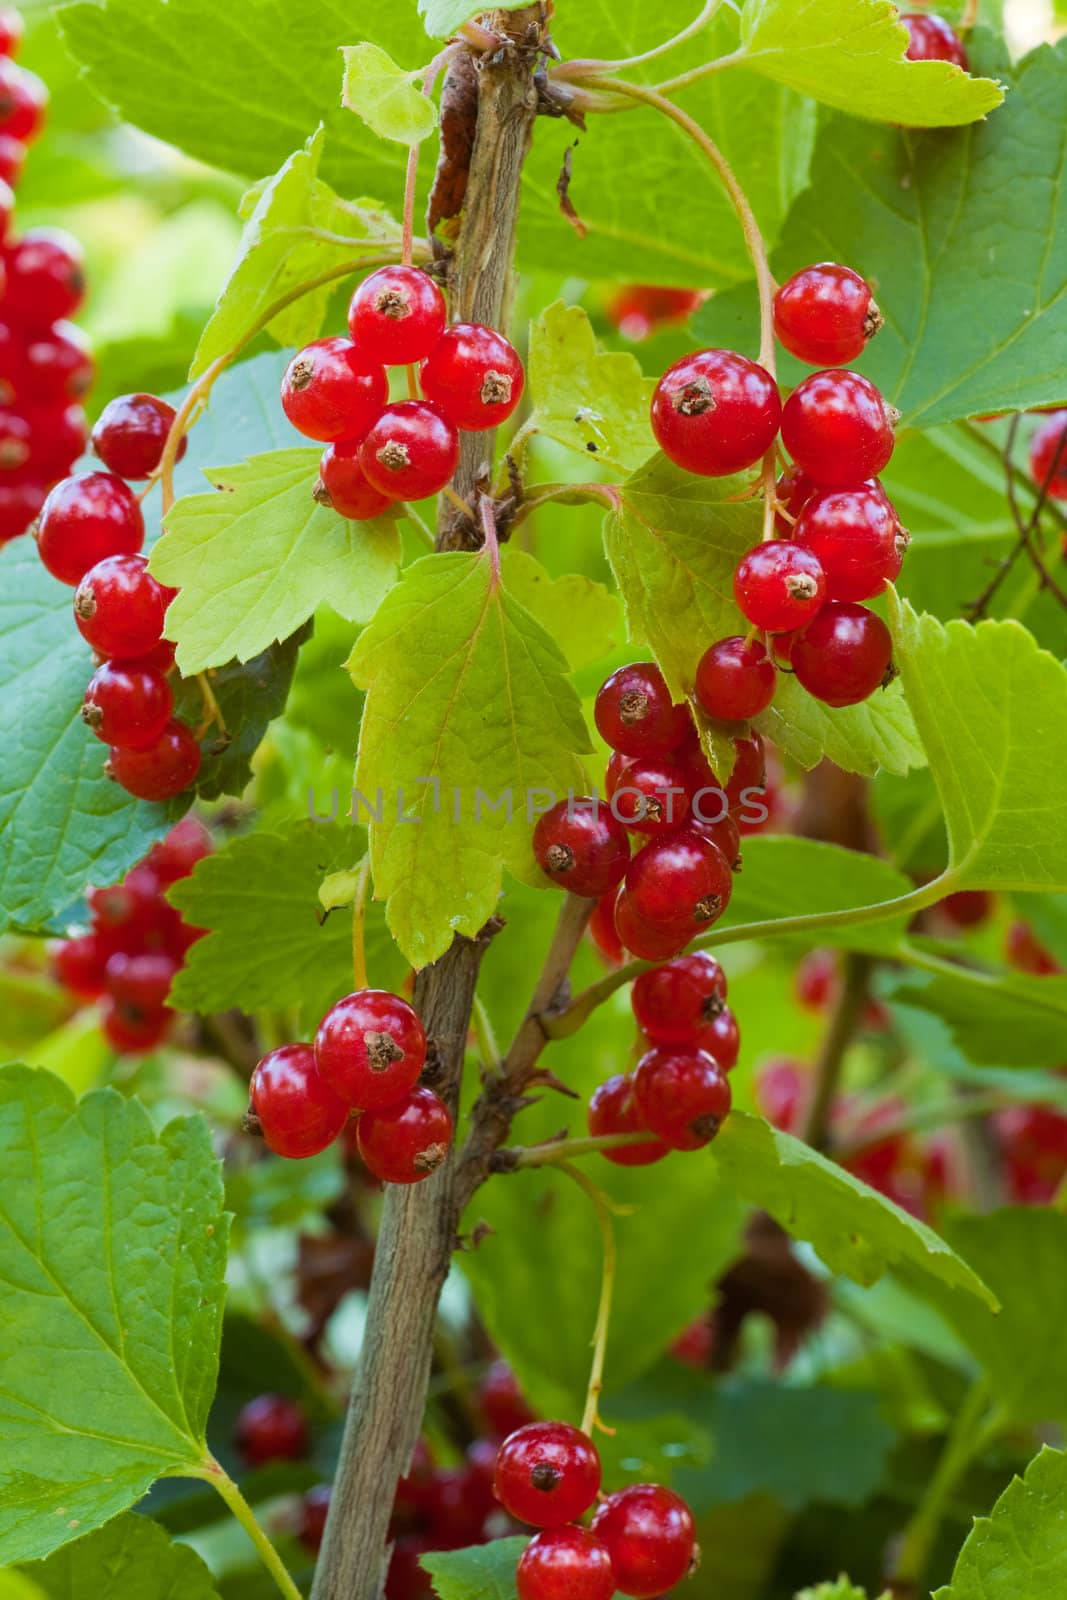 Ripe red currants hanging from bush ready for harvest.